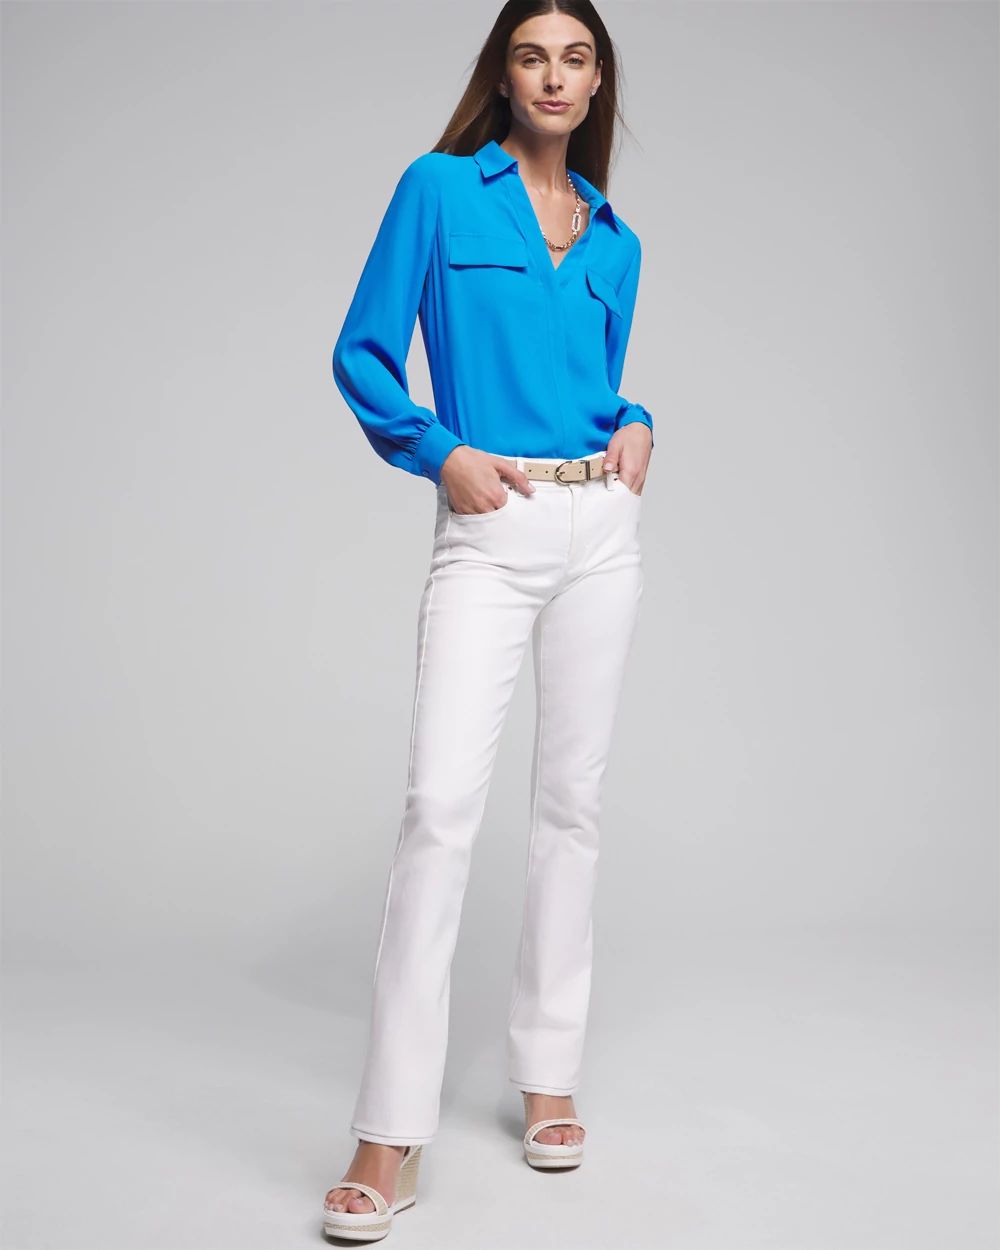 Outlet WHBM Utility Shirt click to view larger image.